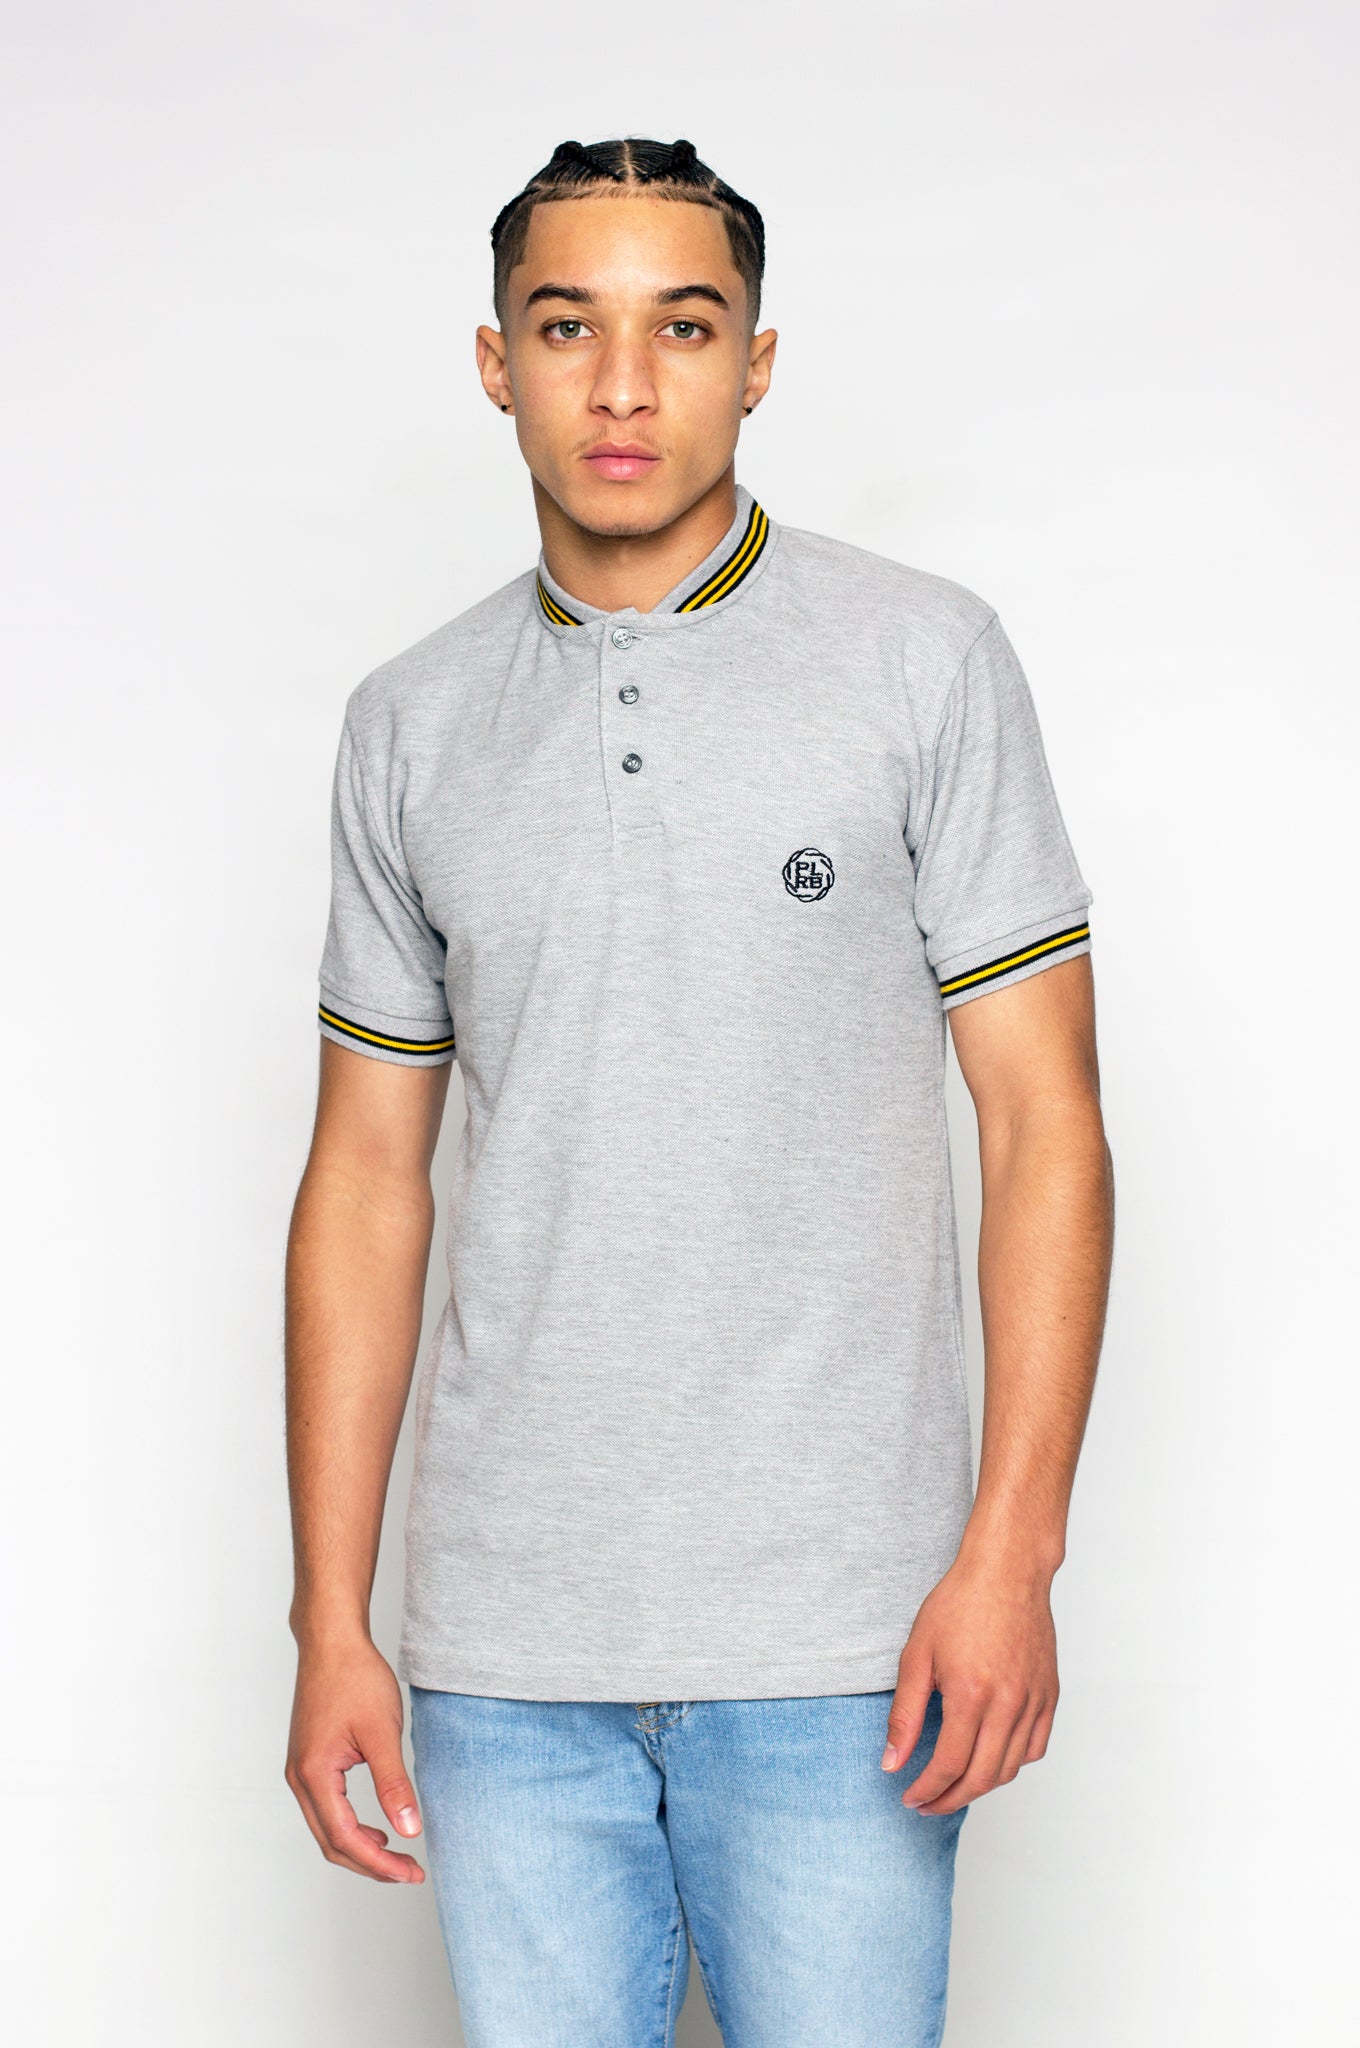 YOUNTVILLLE POLO SHIRT IN HEATHER GREY | Poor Little Rich Boy Clothing